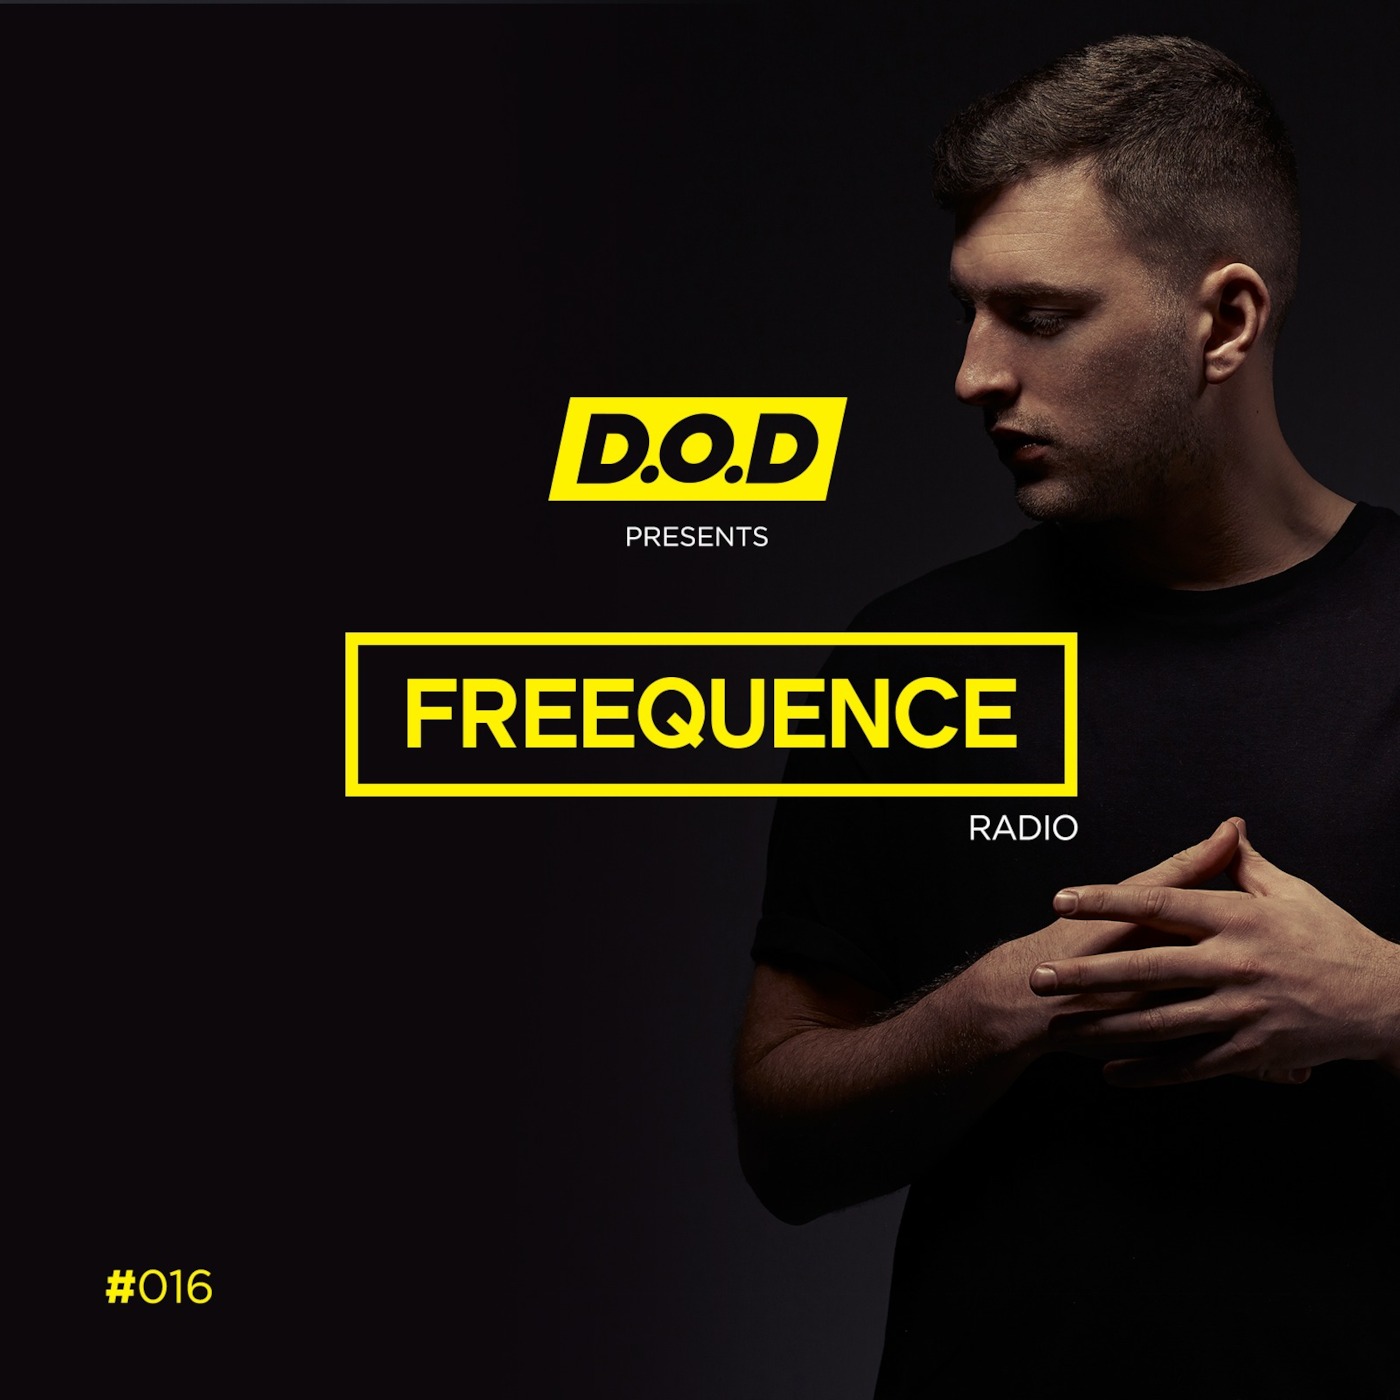 #FREEQUENCE Radio with D.O.D #016